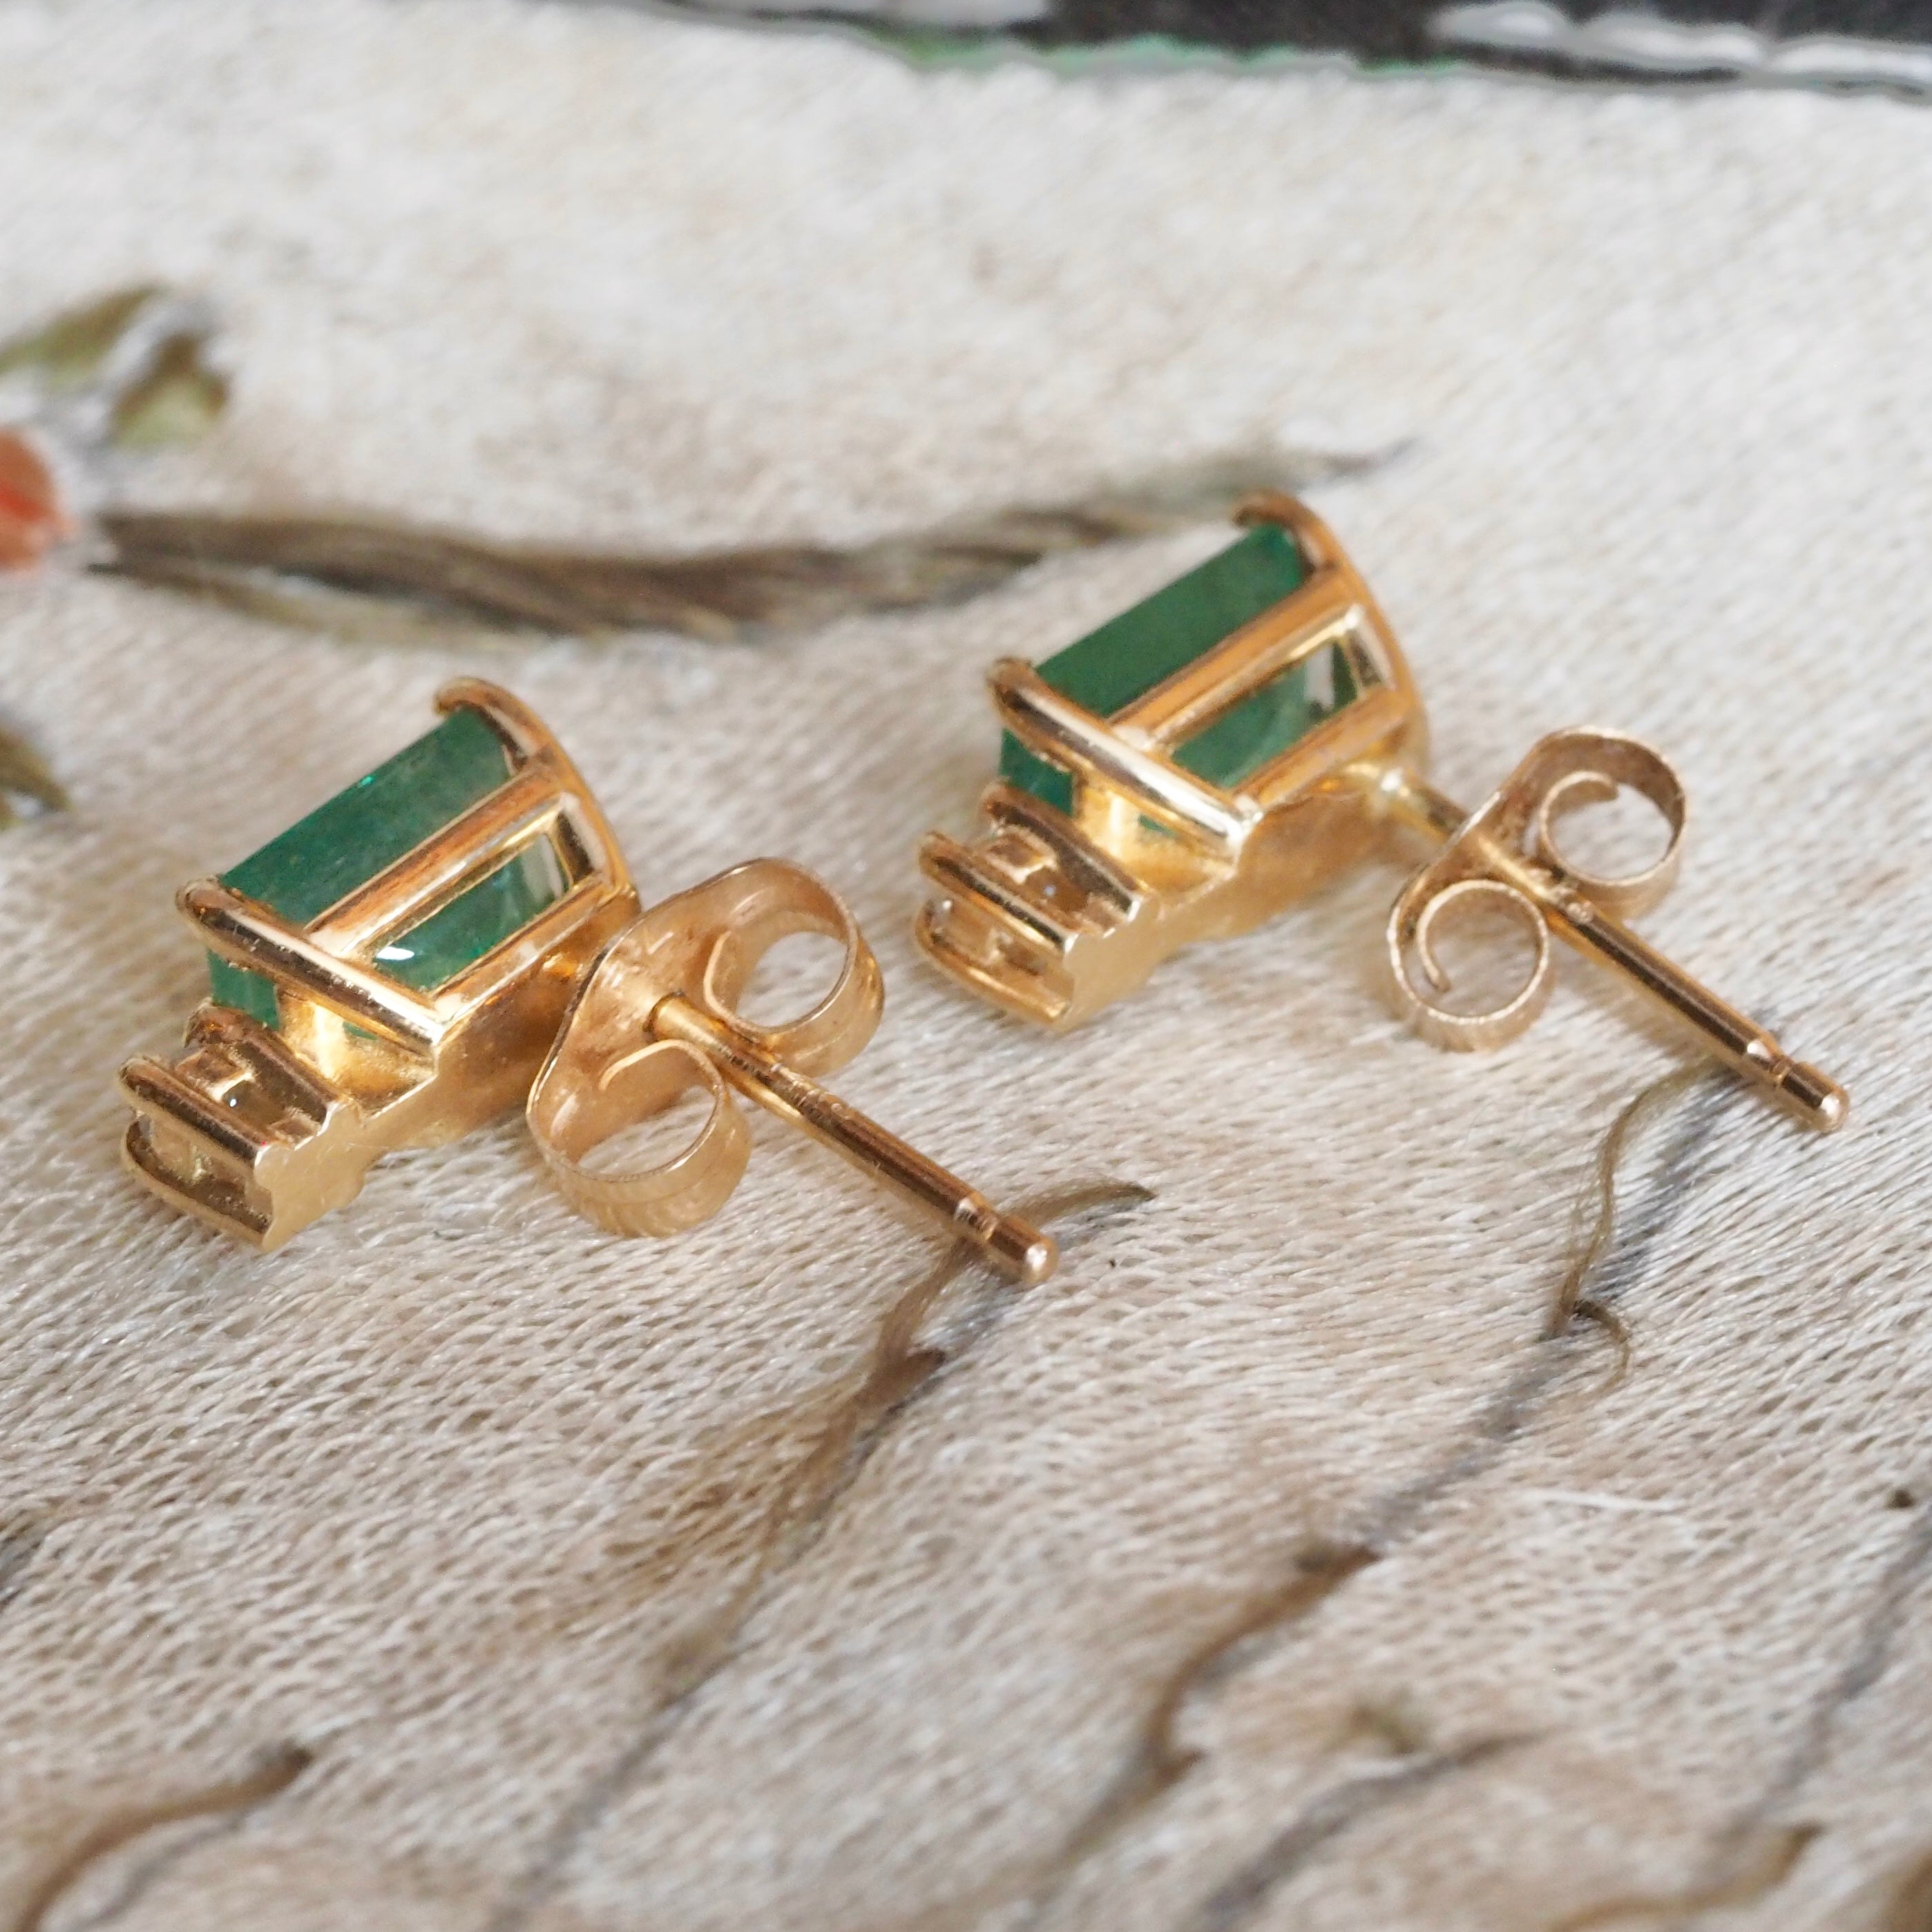 Vintage 14k Gold Emerald and Diamond Earrings